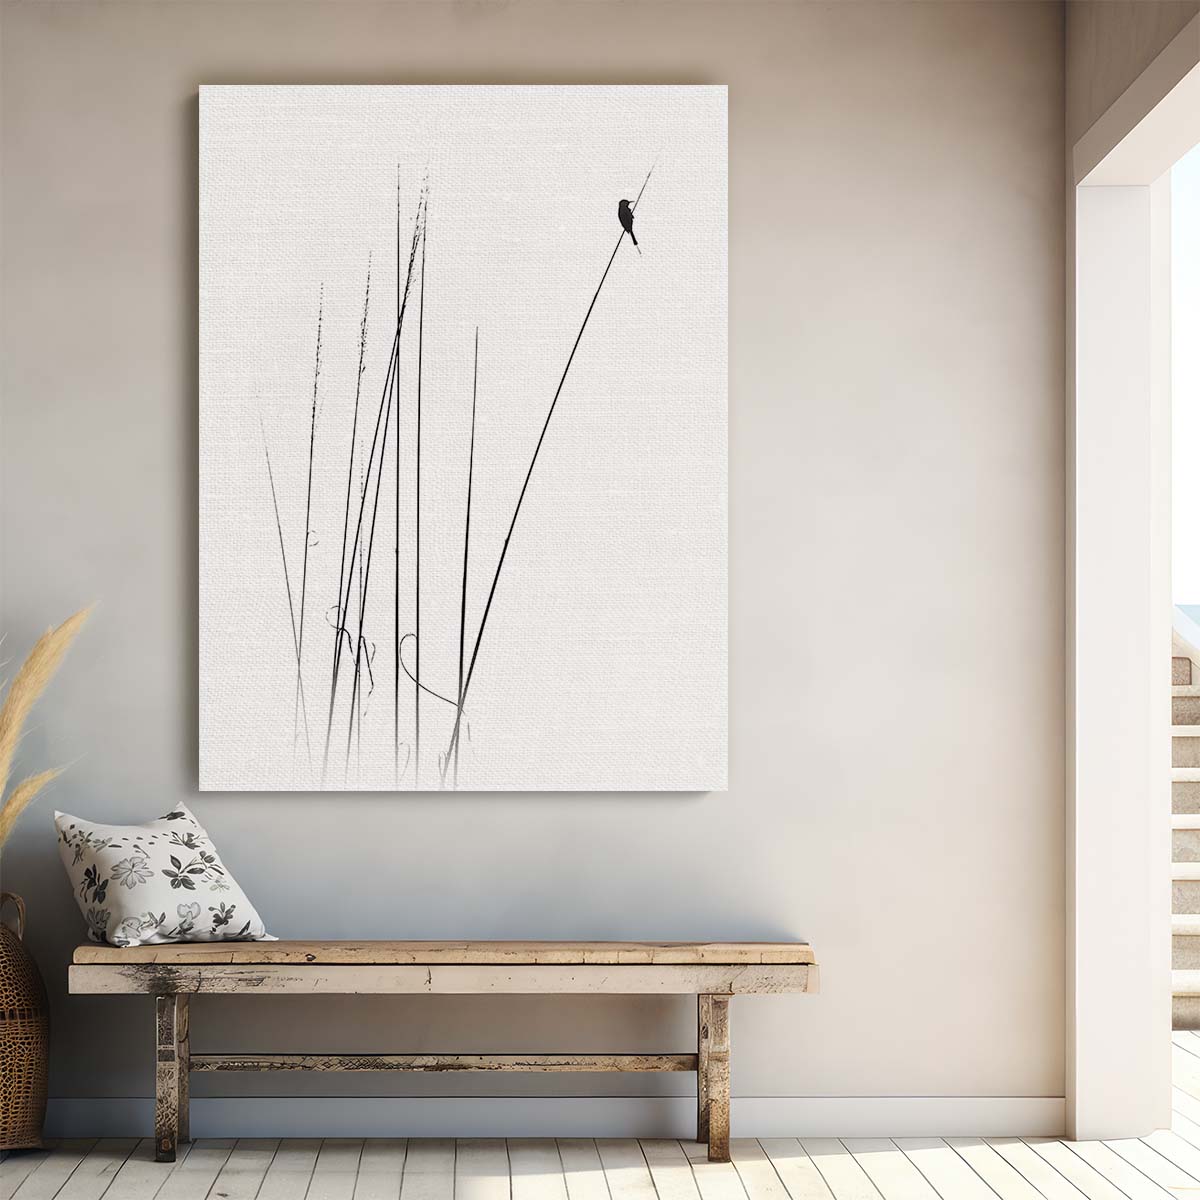 Minimalist Bird Reed Landscape Photography by Swapnil by Luxuriance Designs, made in USA